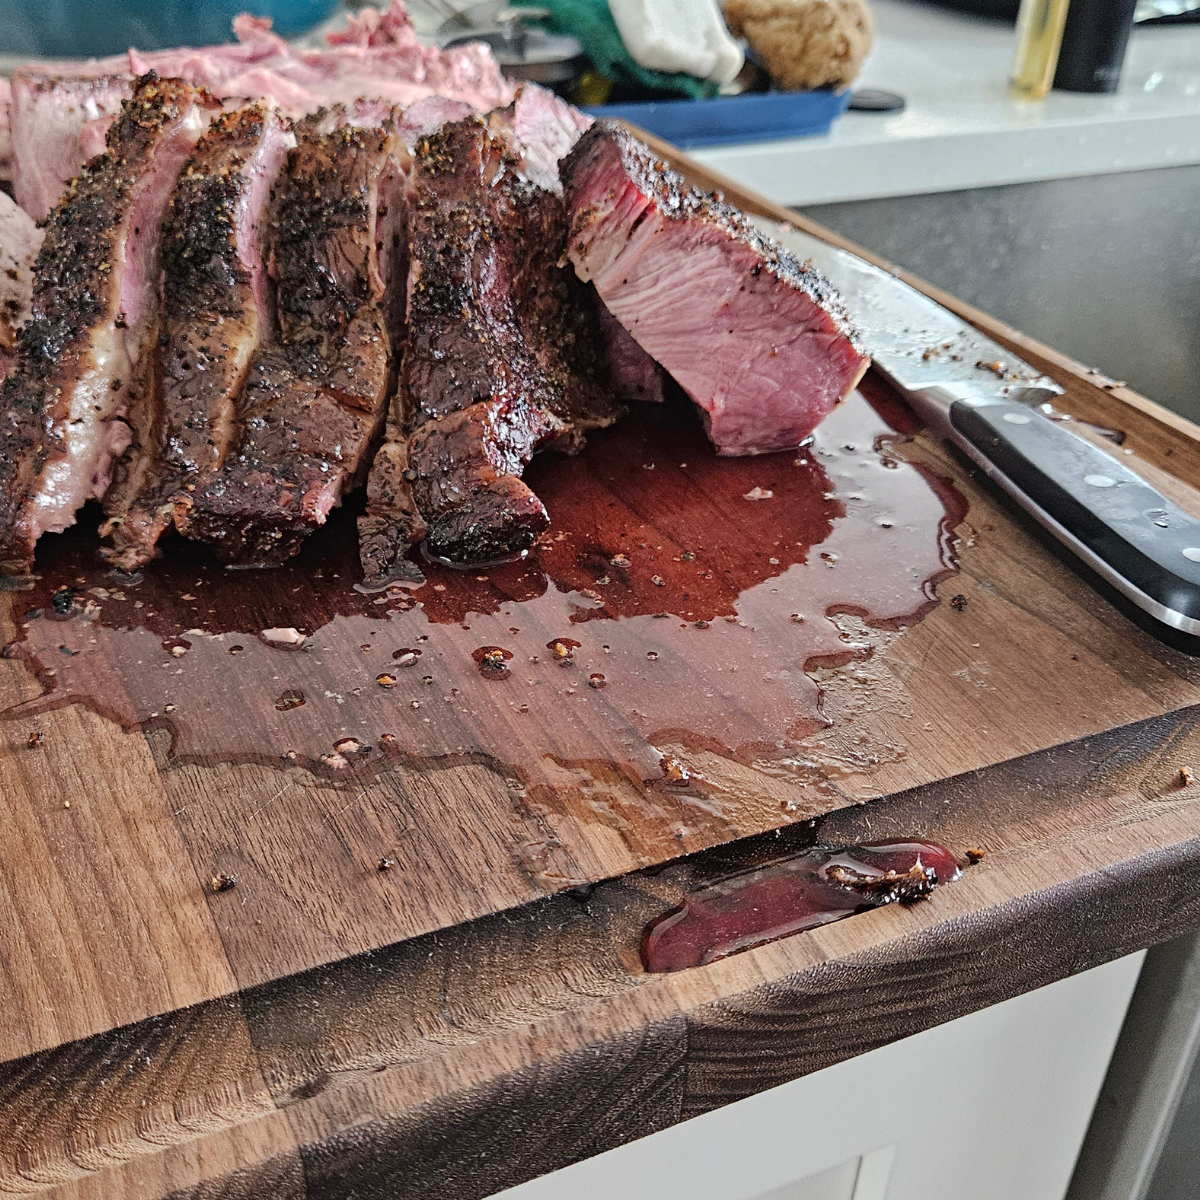 Best Cutting Board for Brisket - Extra Large Wood Board is Best Here's Why